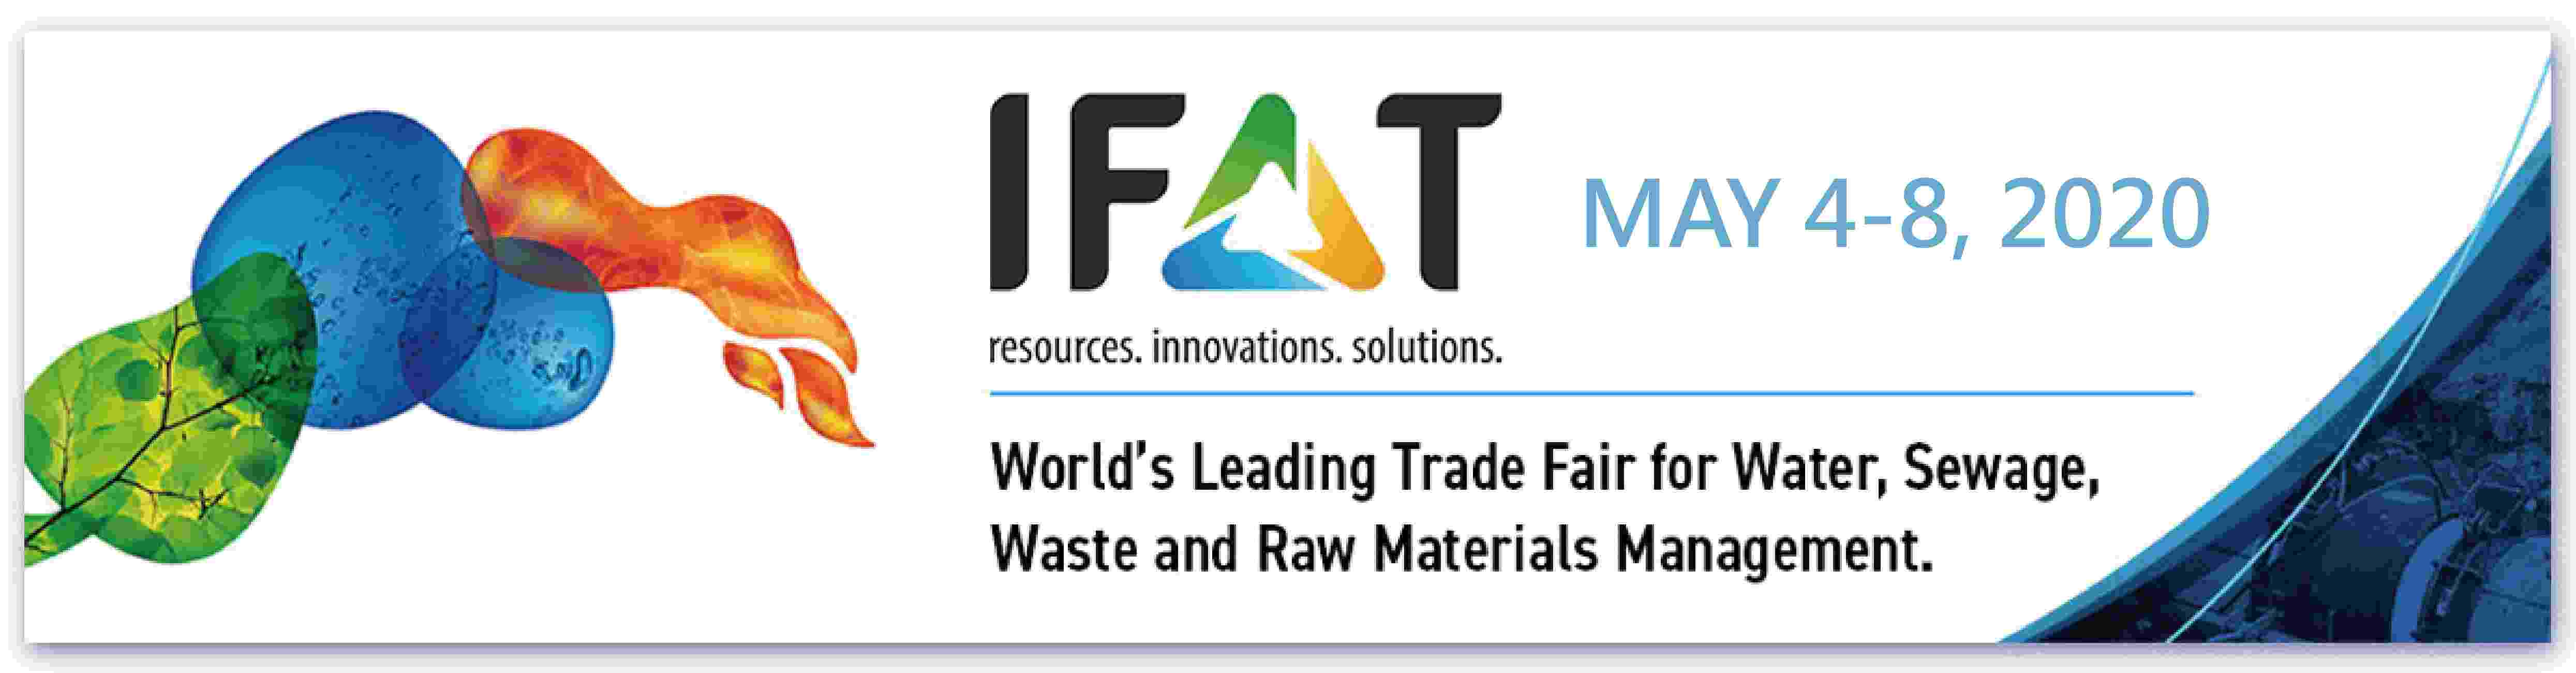 IFAT-World’s Leading Trade Fair for Water